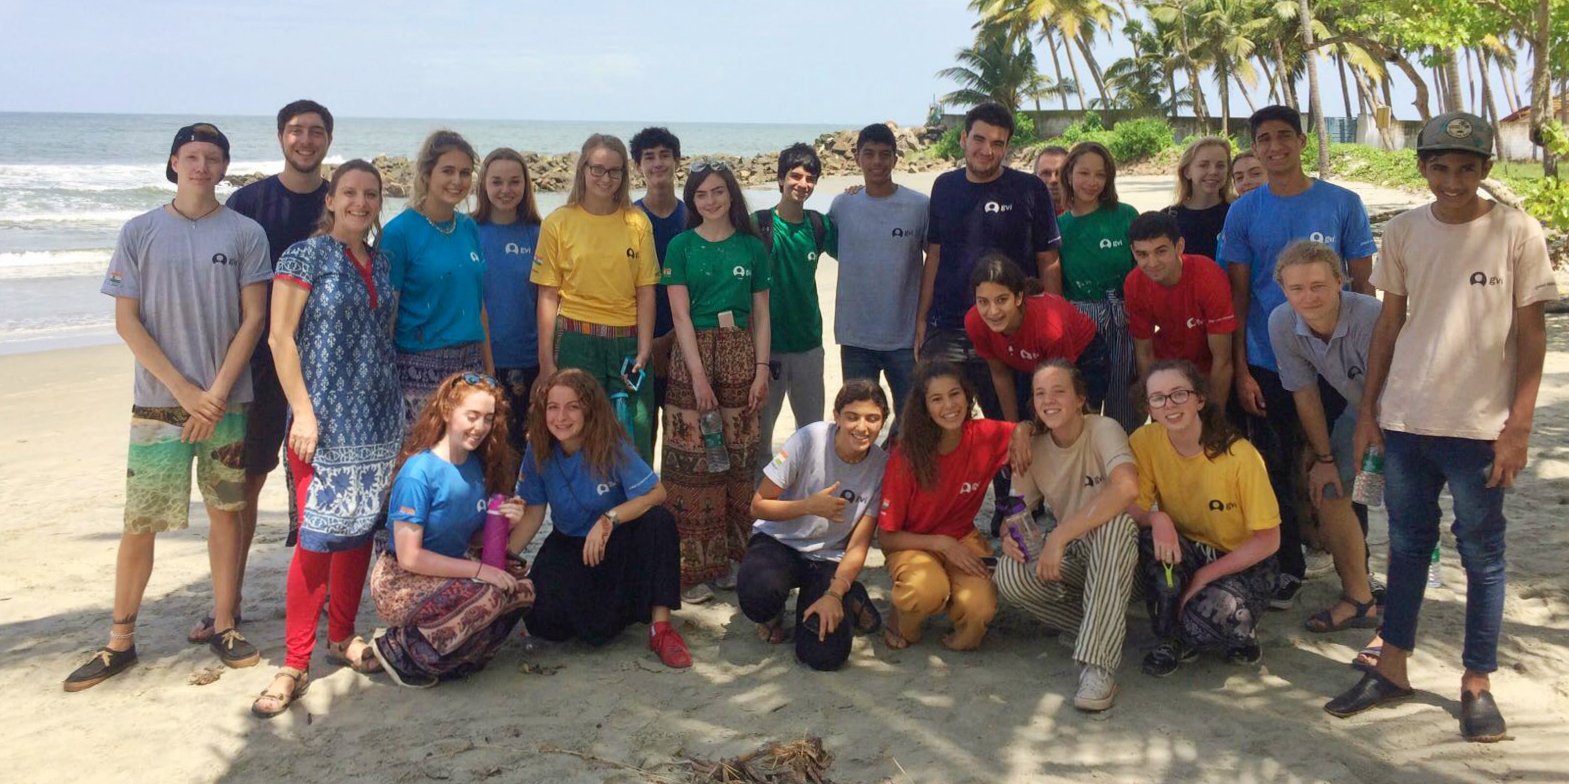 These GVI participants enjoy one of GVI's volunteer trips for teens.